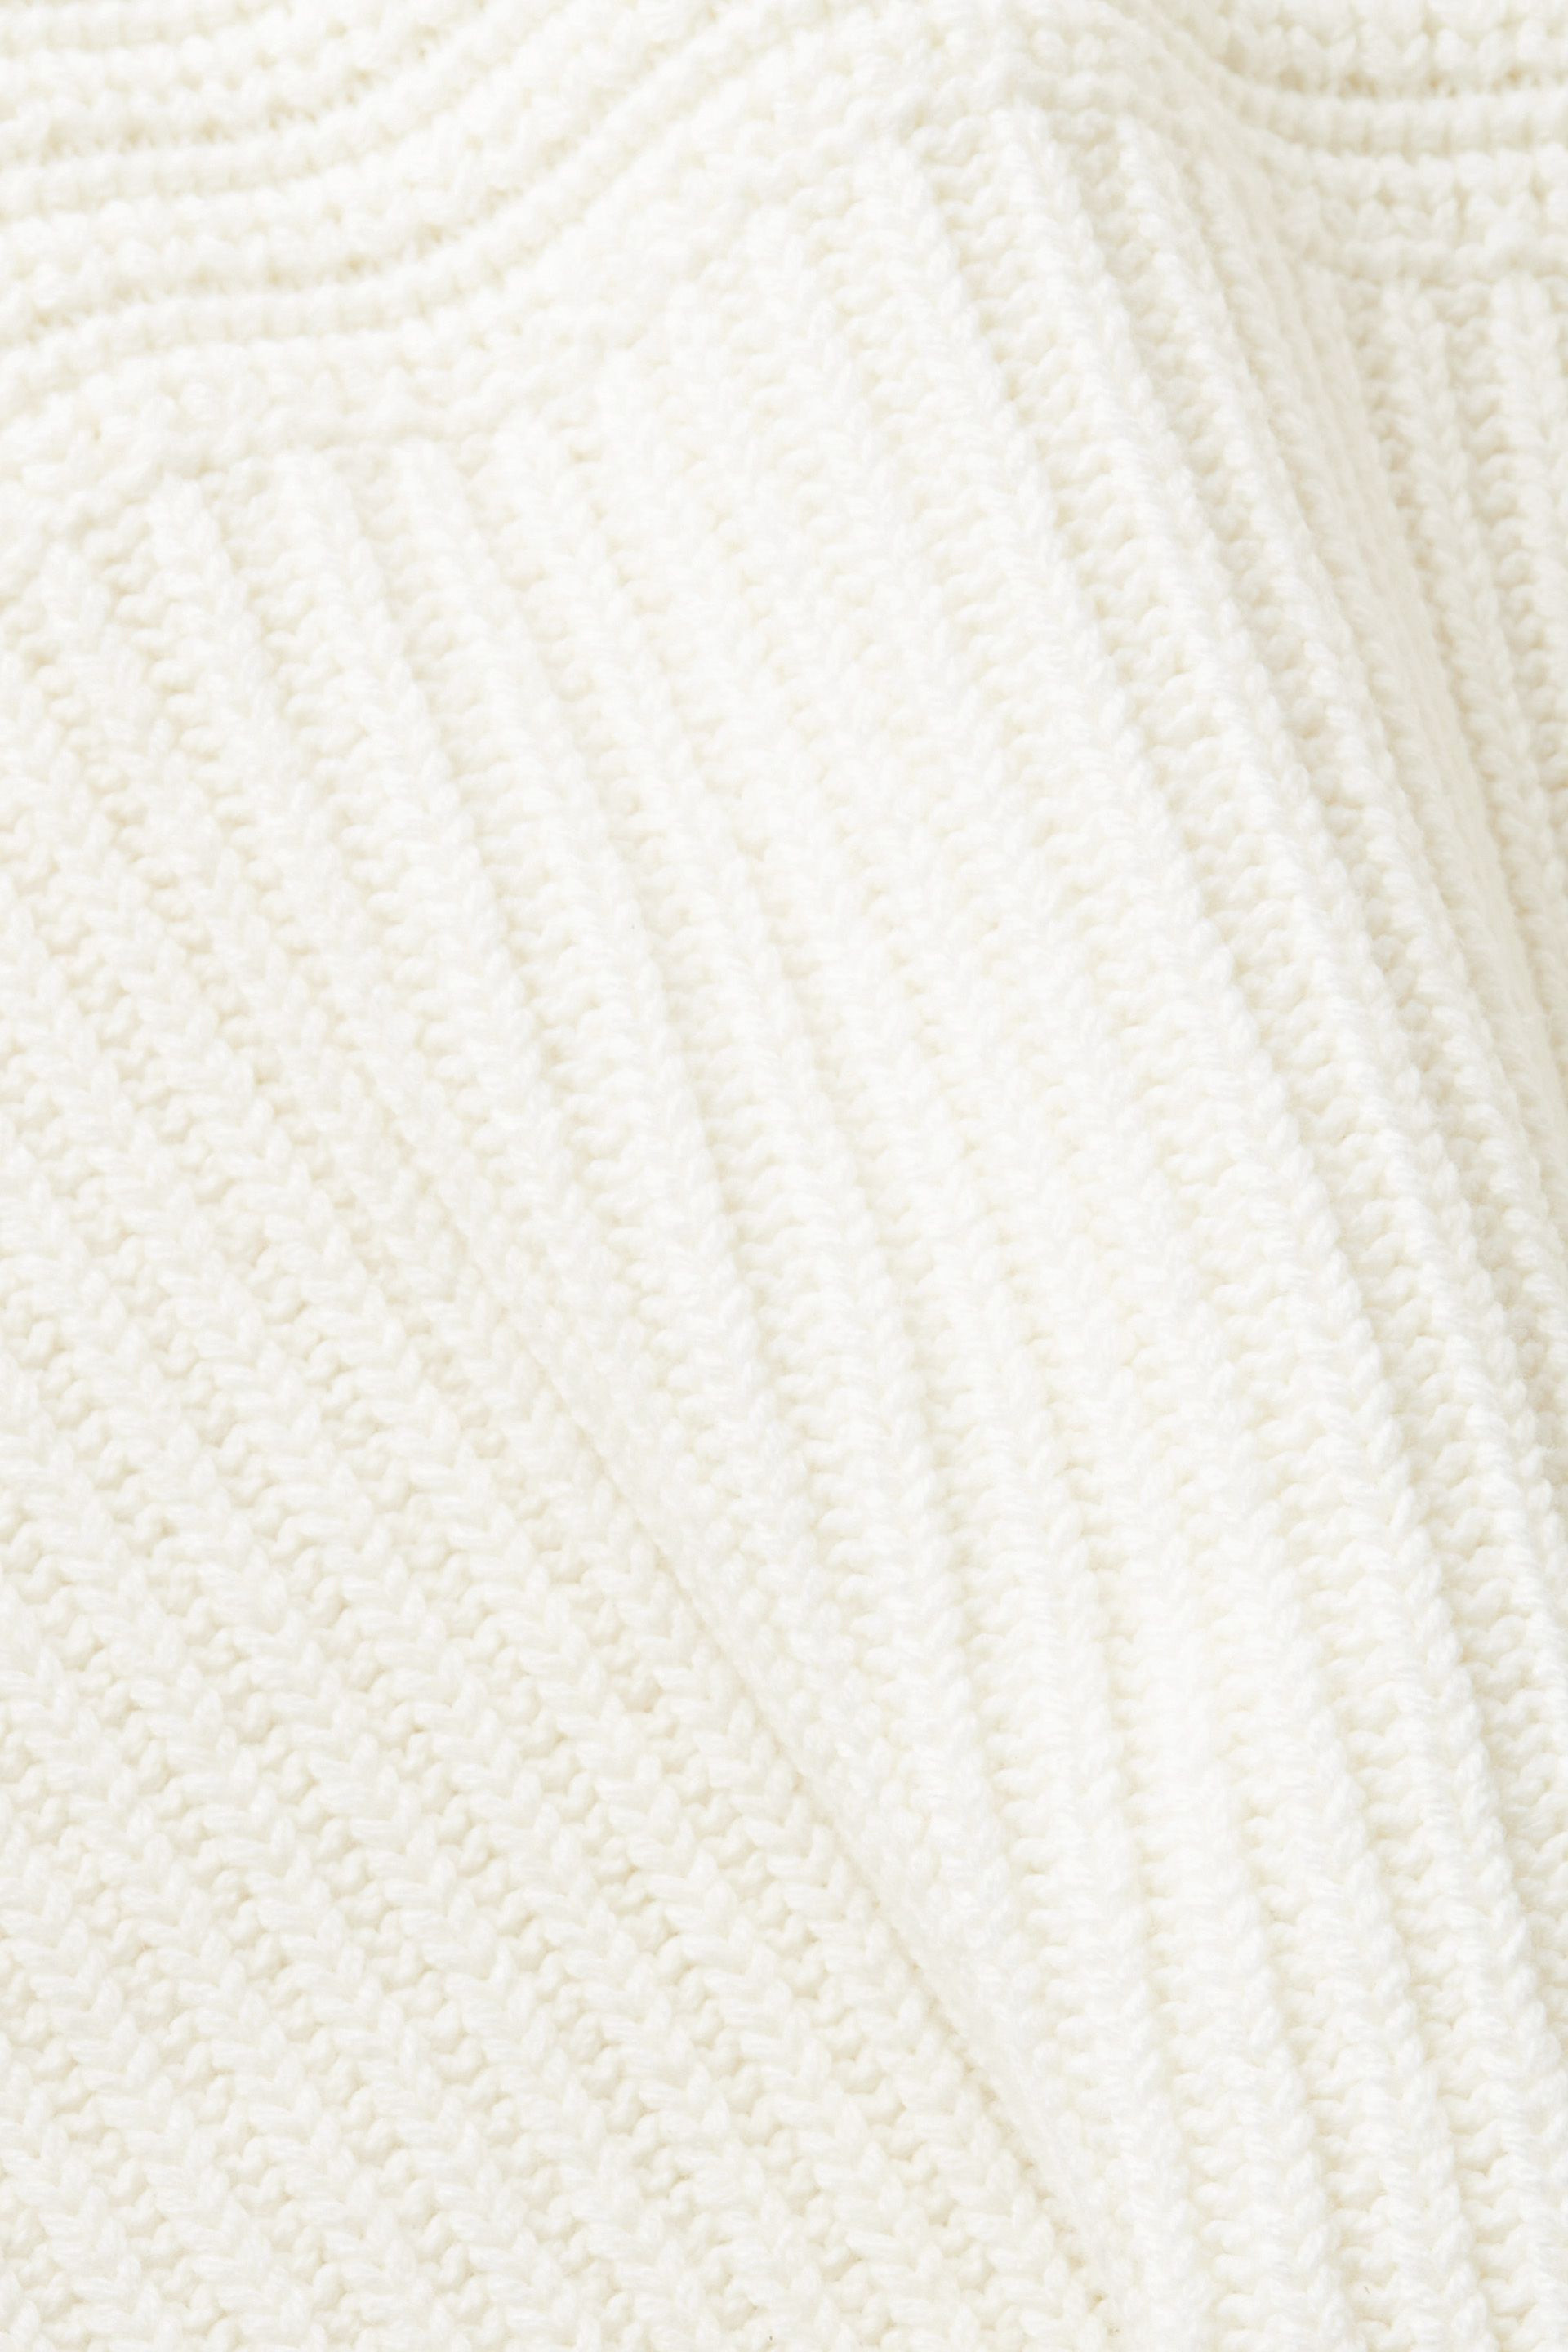 Esprit - Chunky knit pullover in cotton blend, White, large image number 3